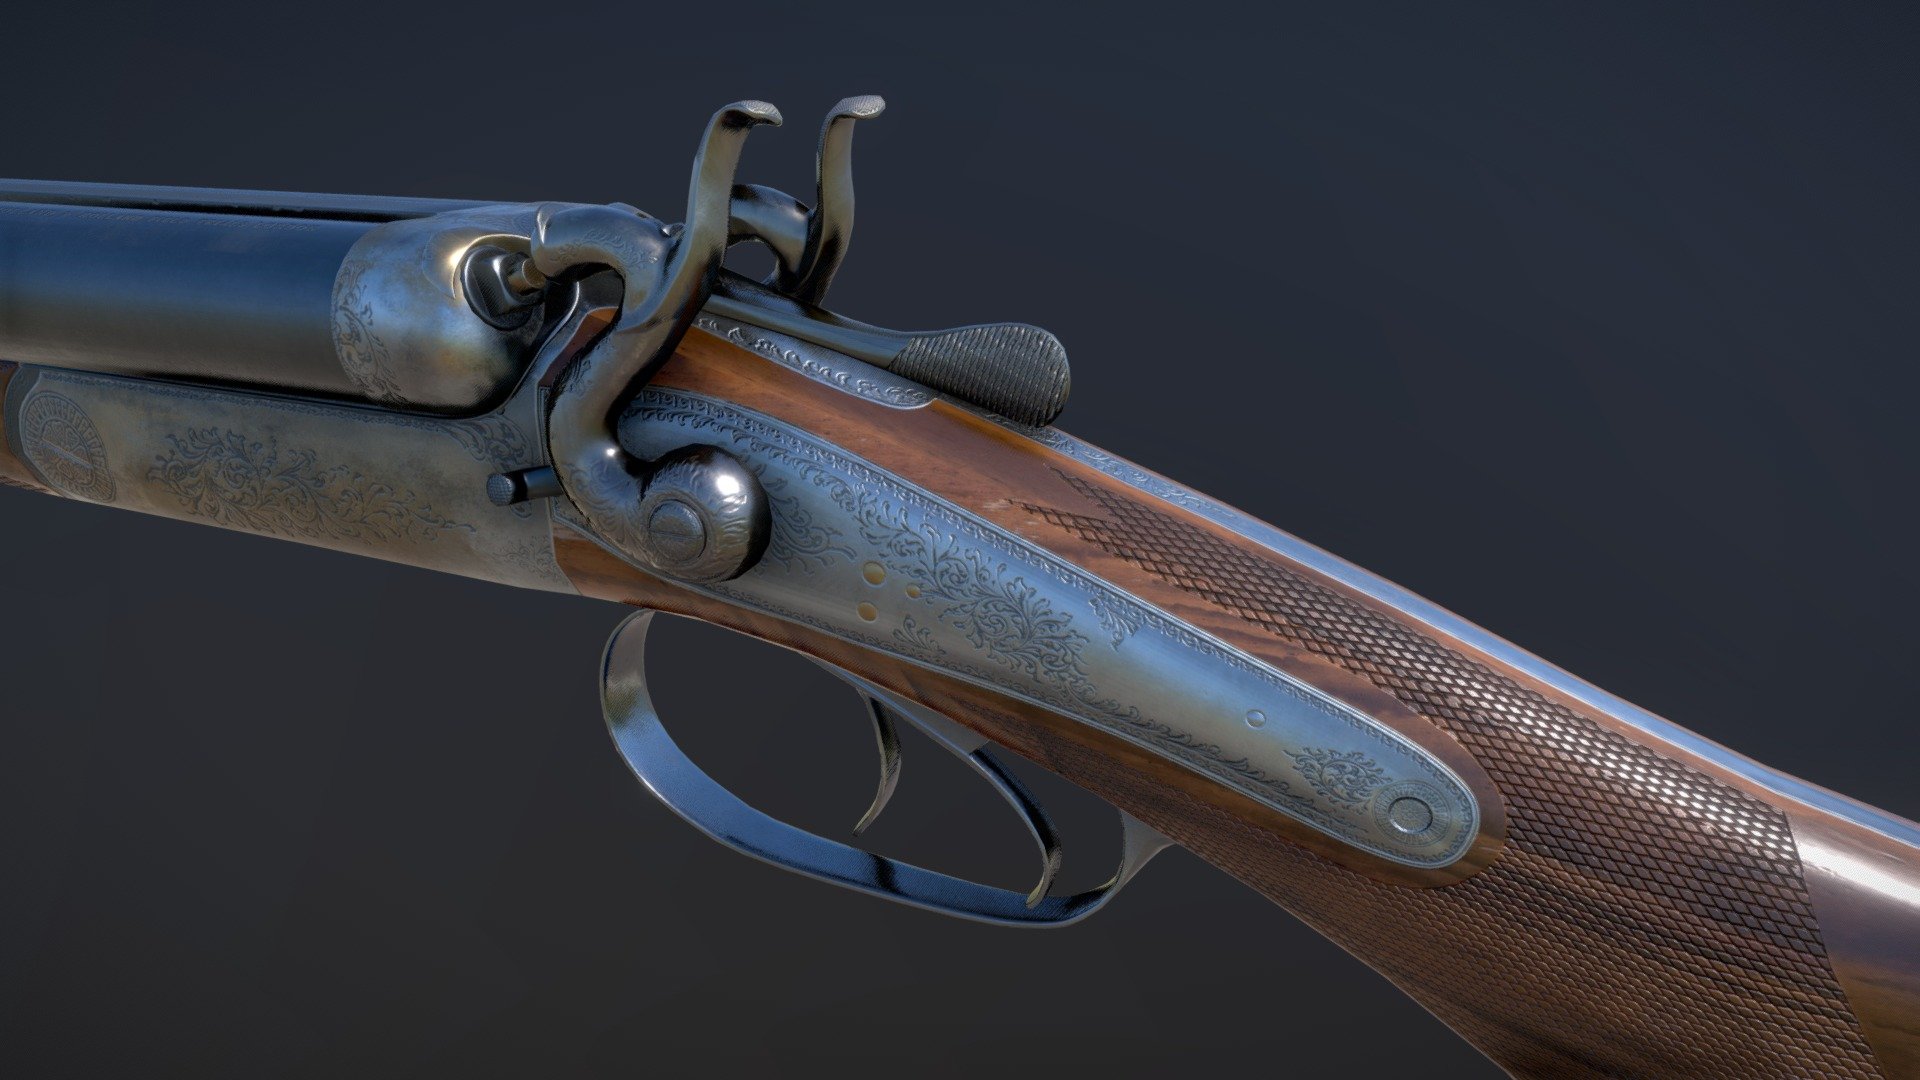 This is slik vintage hunting rifle for the case you need to pack some extra punch ;)
It was a fun and challenging final assignment for GAP this year.

I finally managed to speed up my highpoly game a bit with a quad chamfer workflow. Modelled in 3ds Max and textured in Substance Painter. Feel free to leave some feedback! - HOLLAND & HOLLAND - HAMMER DOUBLE RIFLE, 450 BPE - 3D model by Peter_Kostov 3d model